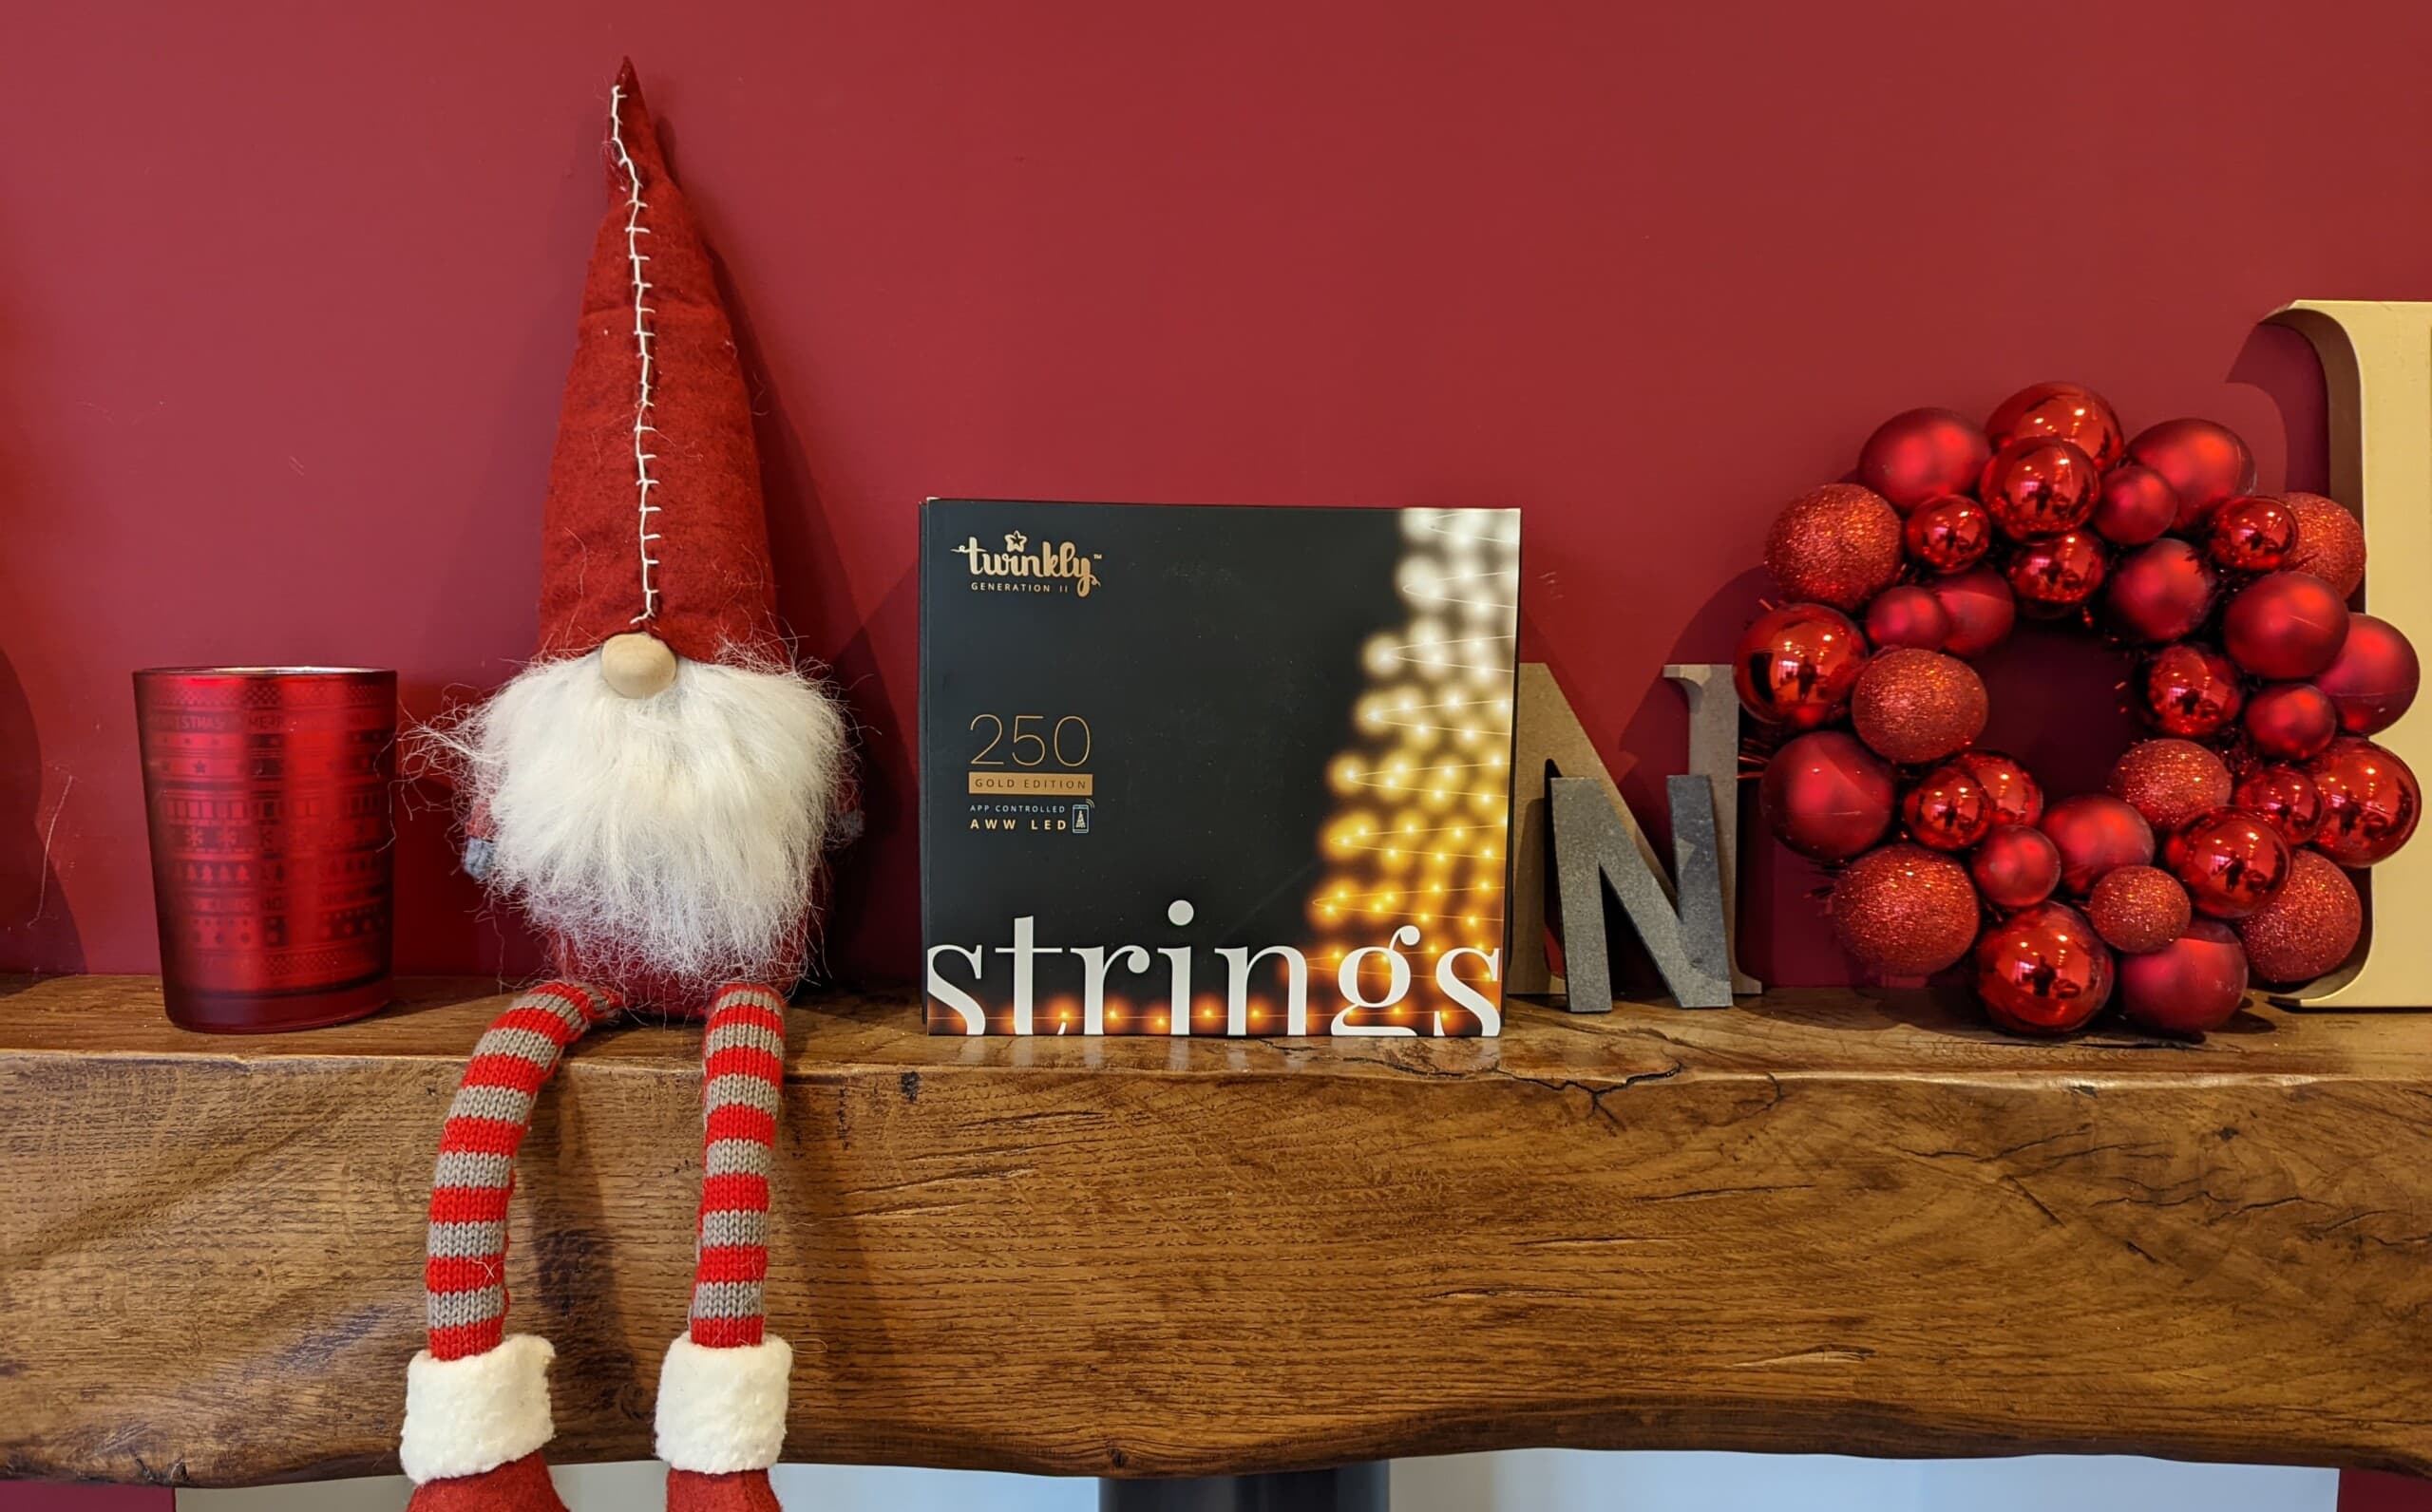 Twinkly Strings Gold Edition Review – Programmable Smart Christmas Tree Lights with 250 Amber, White, Warm White LEDs